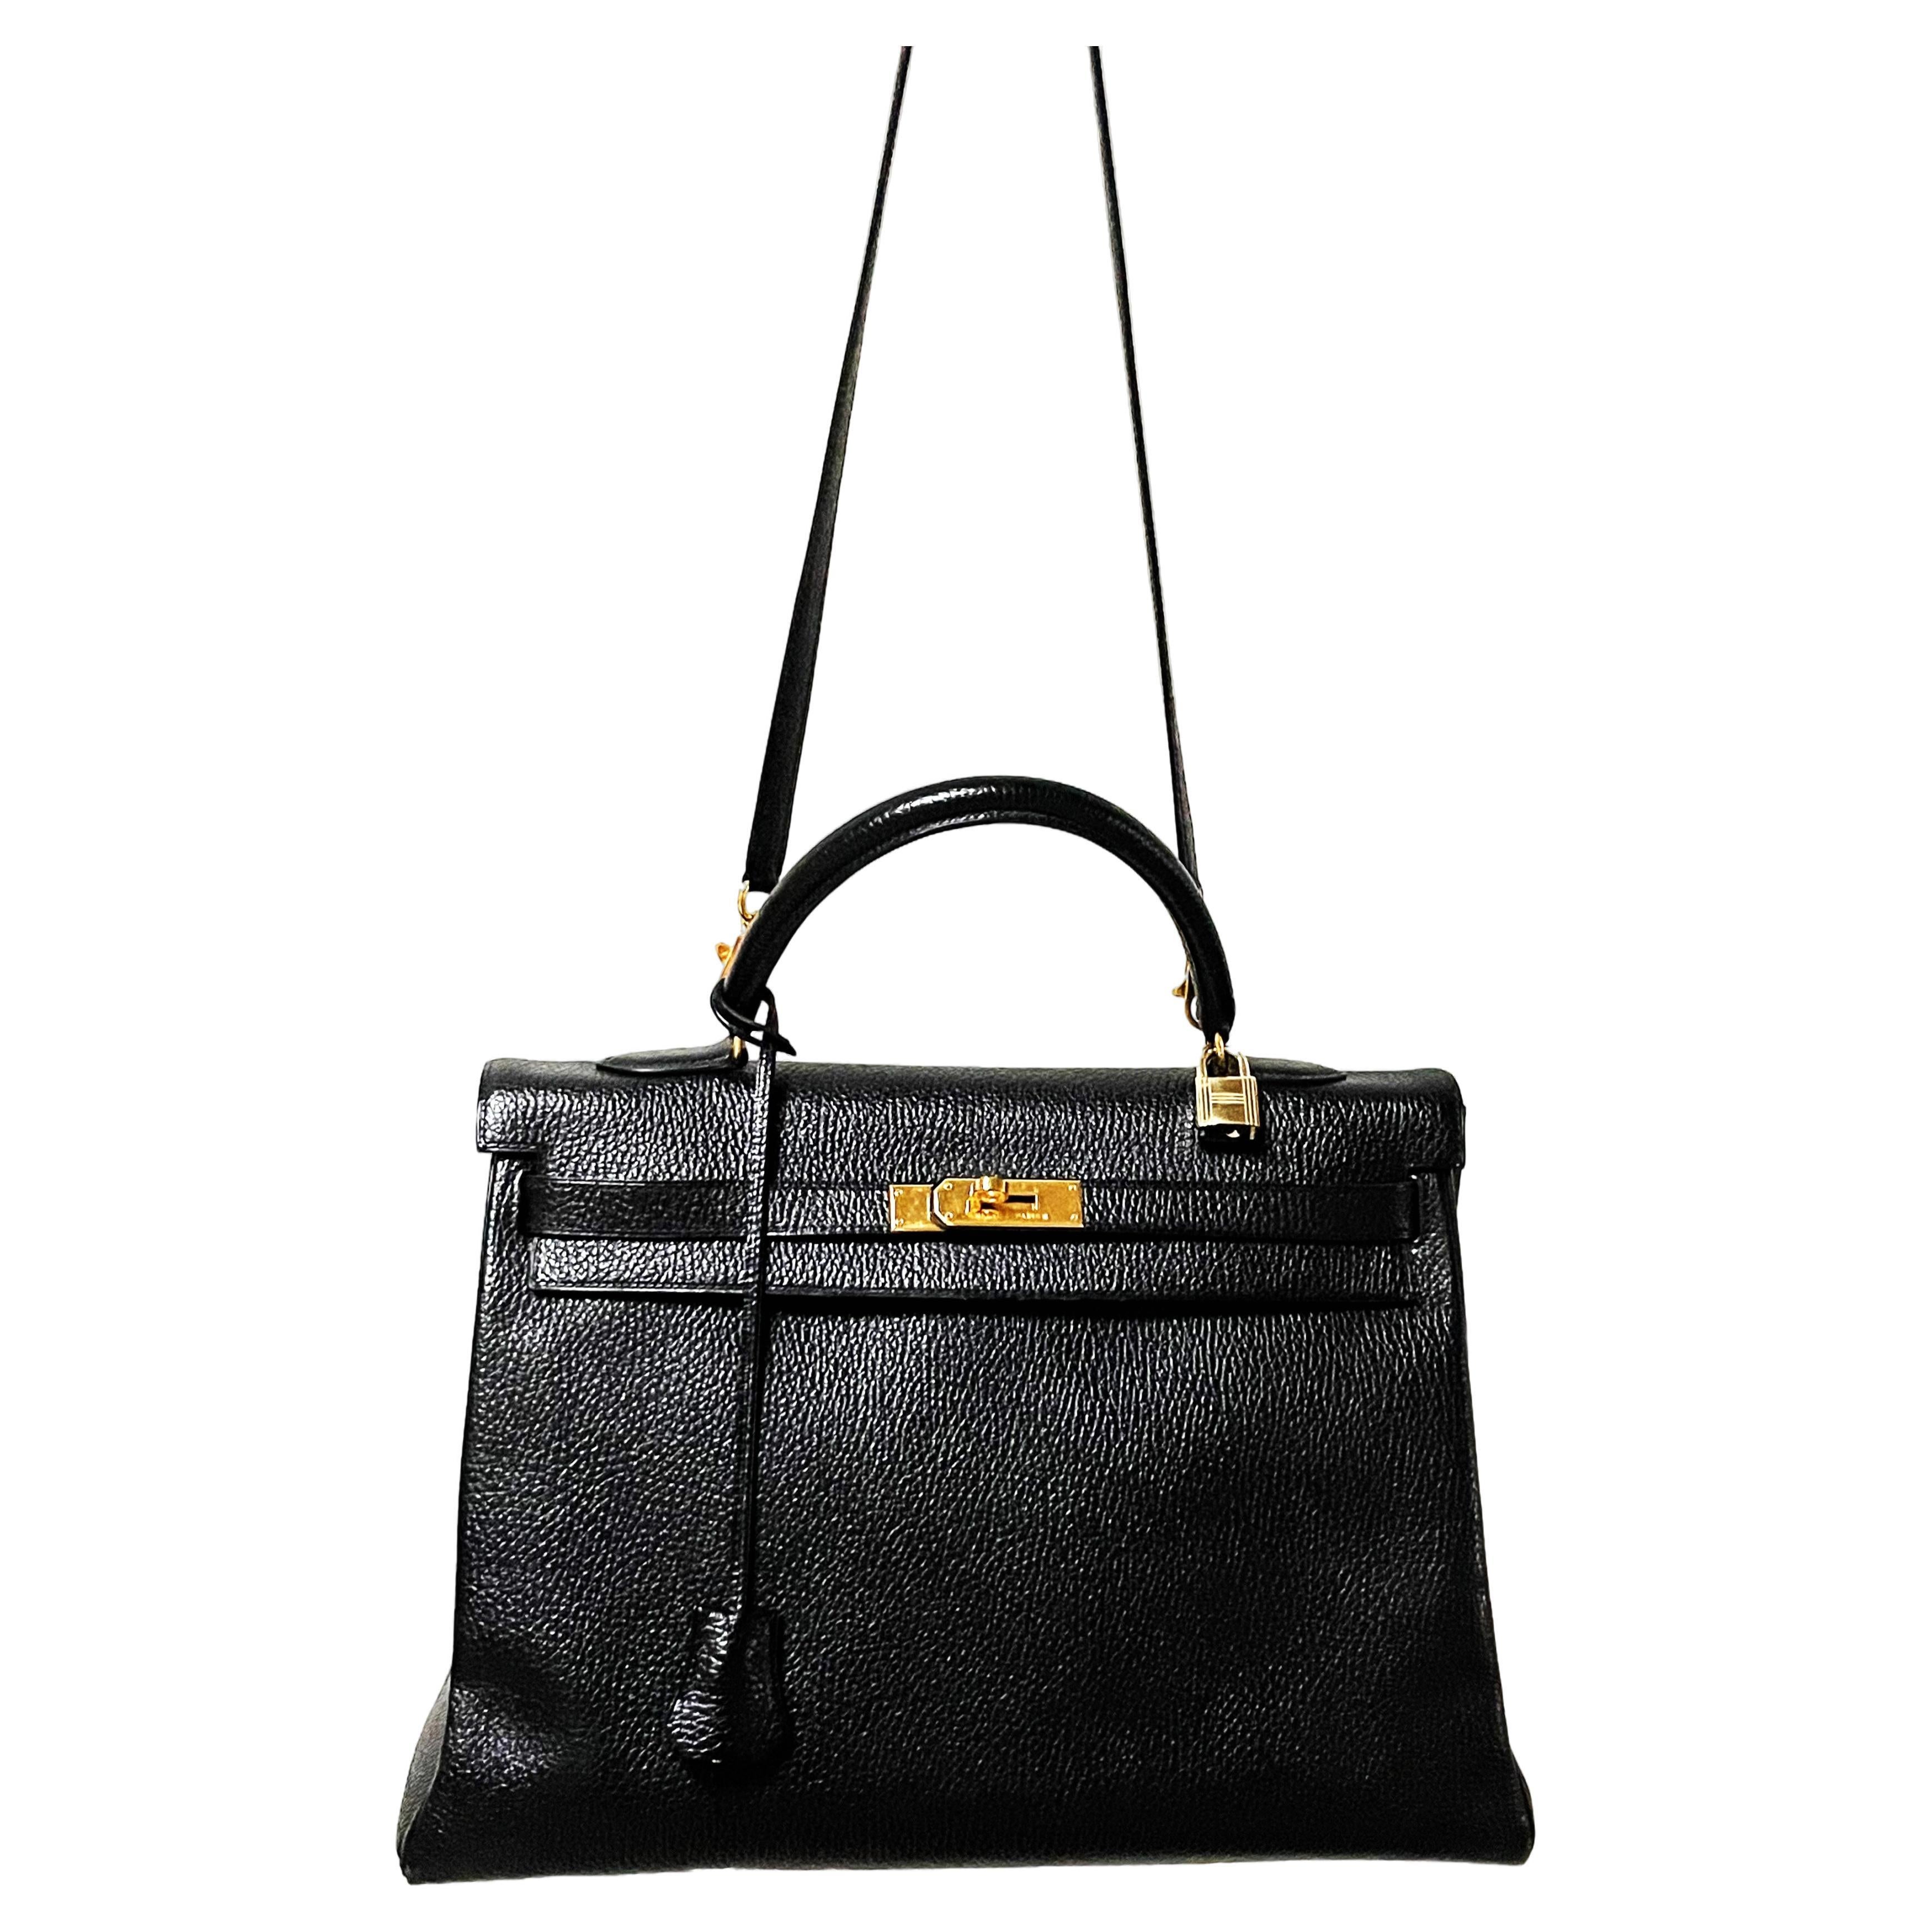 HERMES KELLY BAG 2 WAY 35 cm, CHEVRE LEATHER IN BLACK, KOLLECTION 1998 - B  For Sale